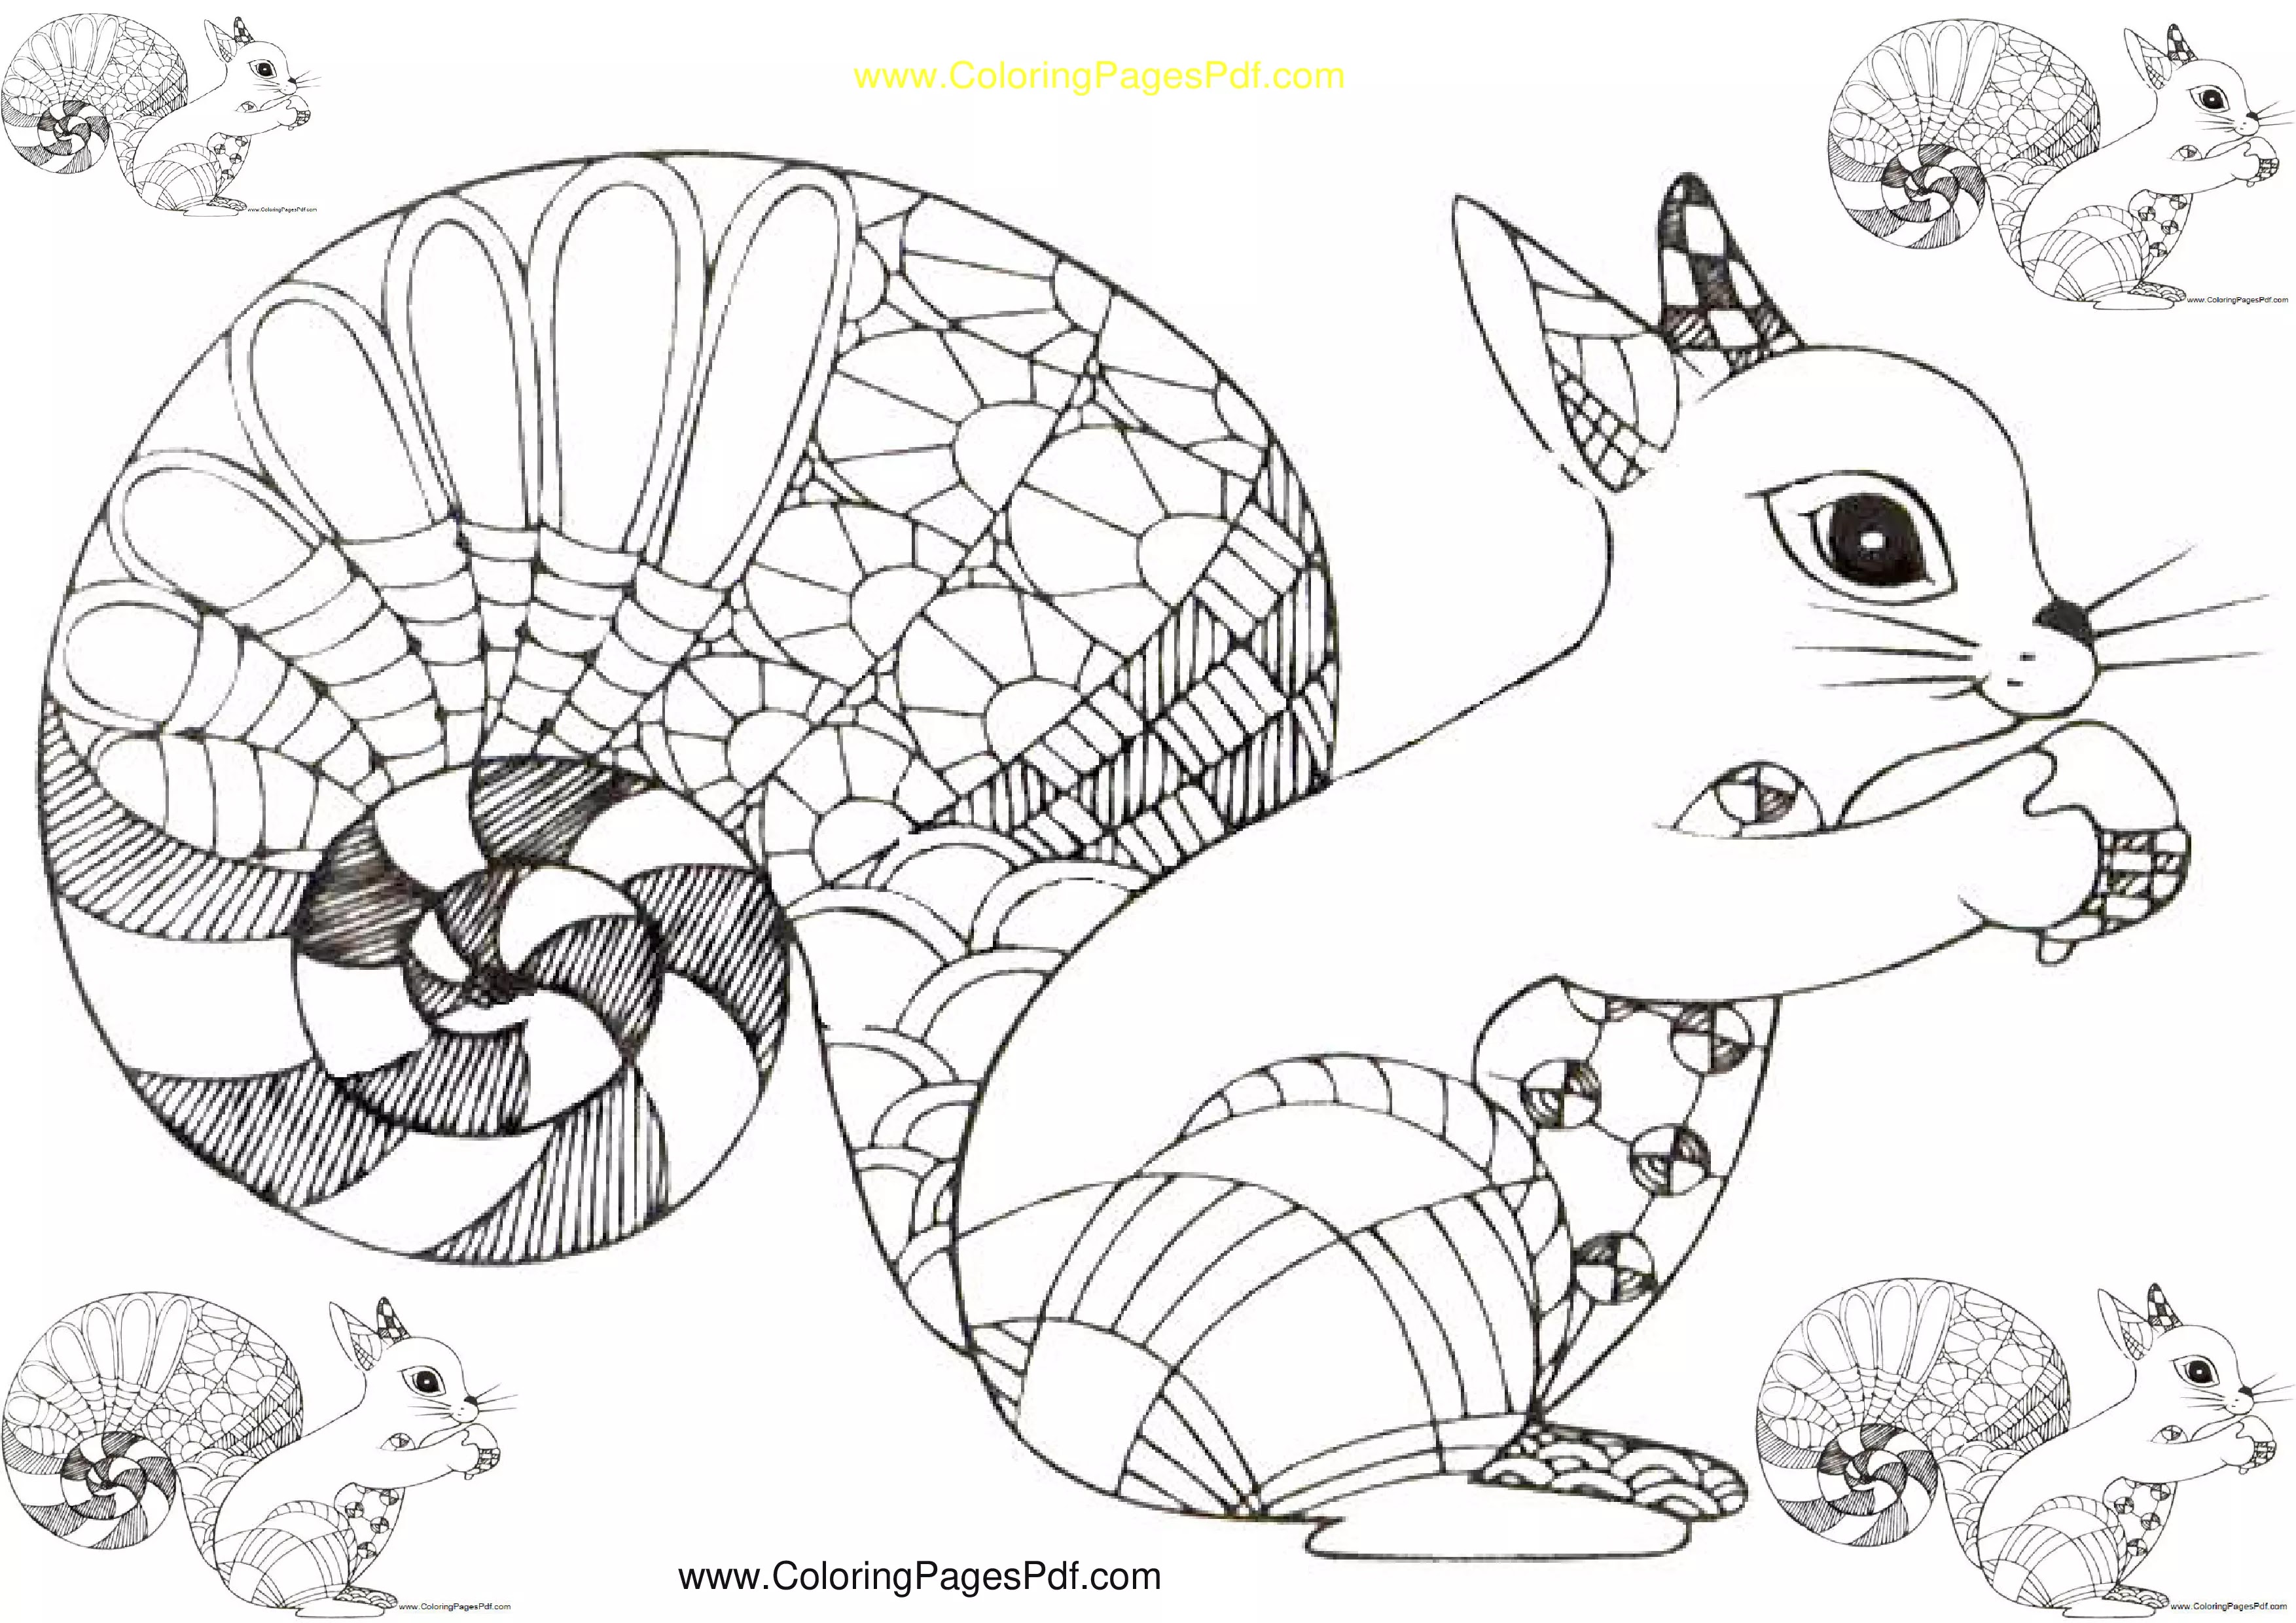 Aesthetic coloring pages for kids